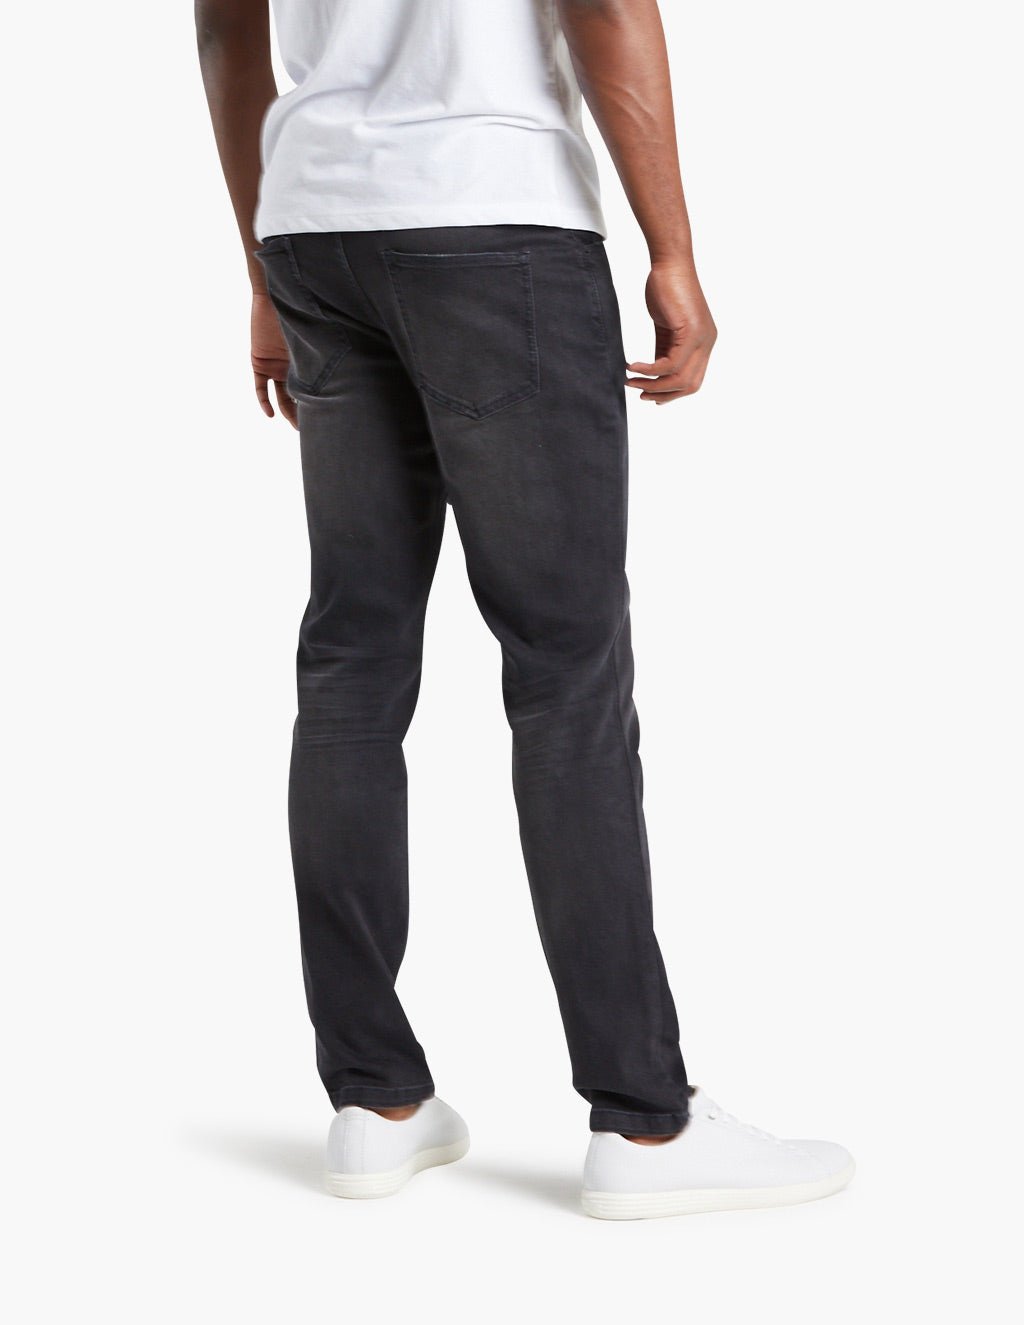 Men's Perfect Jeans (Buy 2 free shipping)